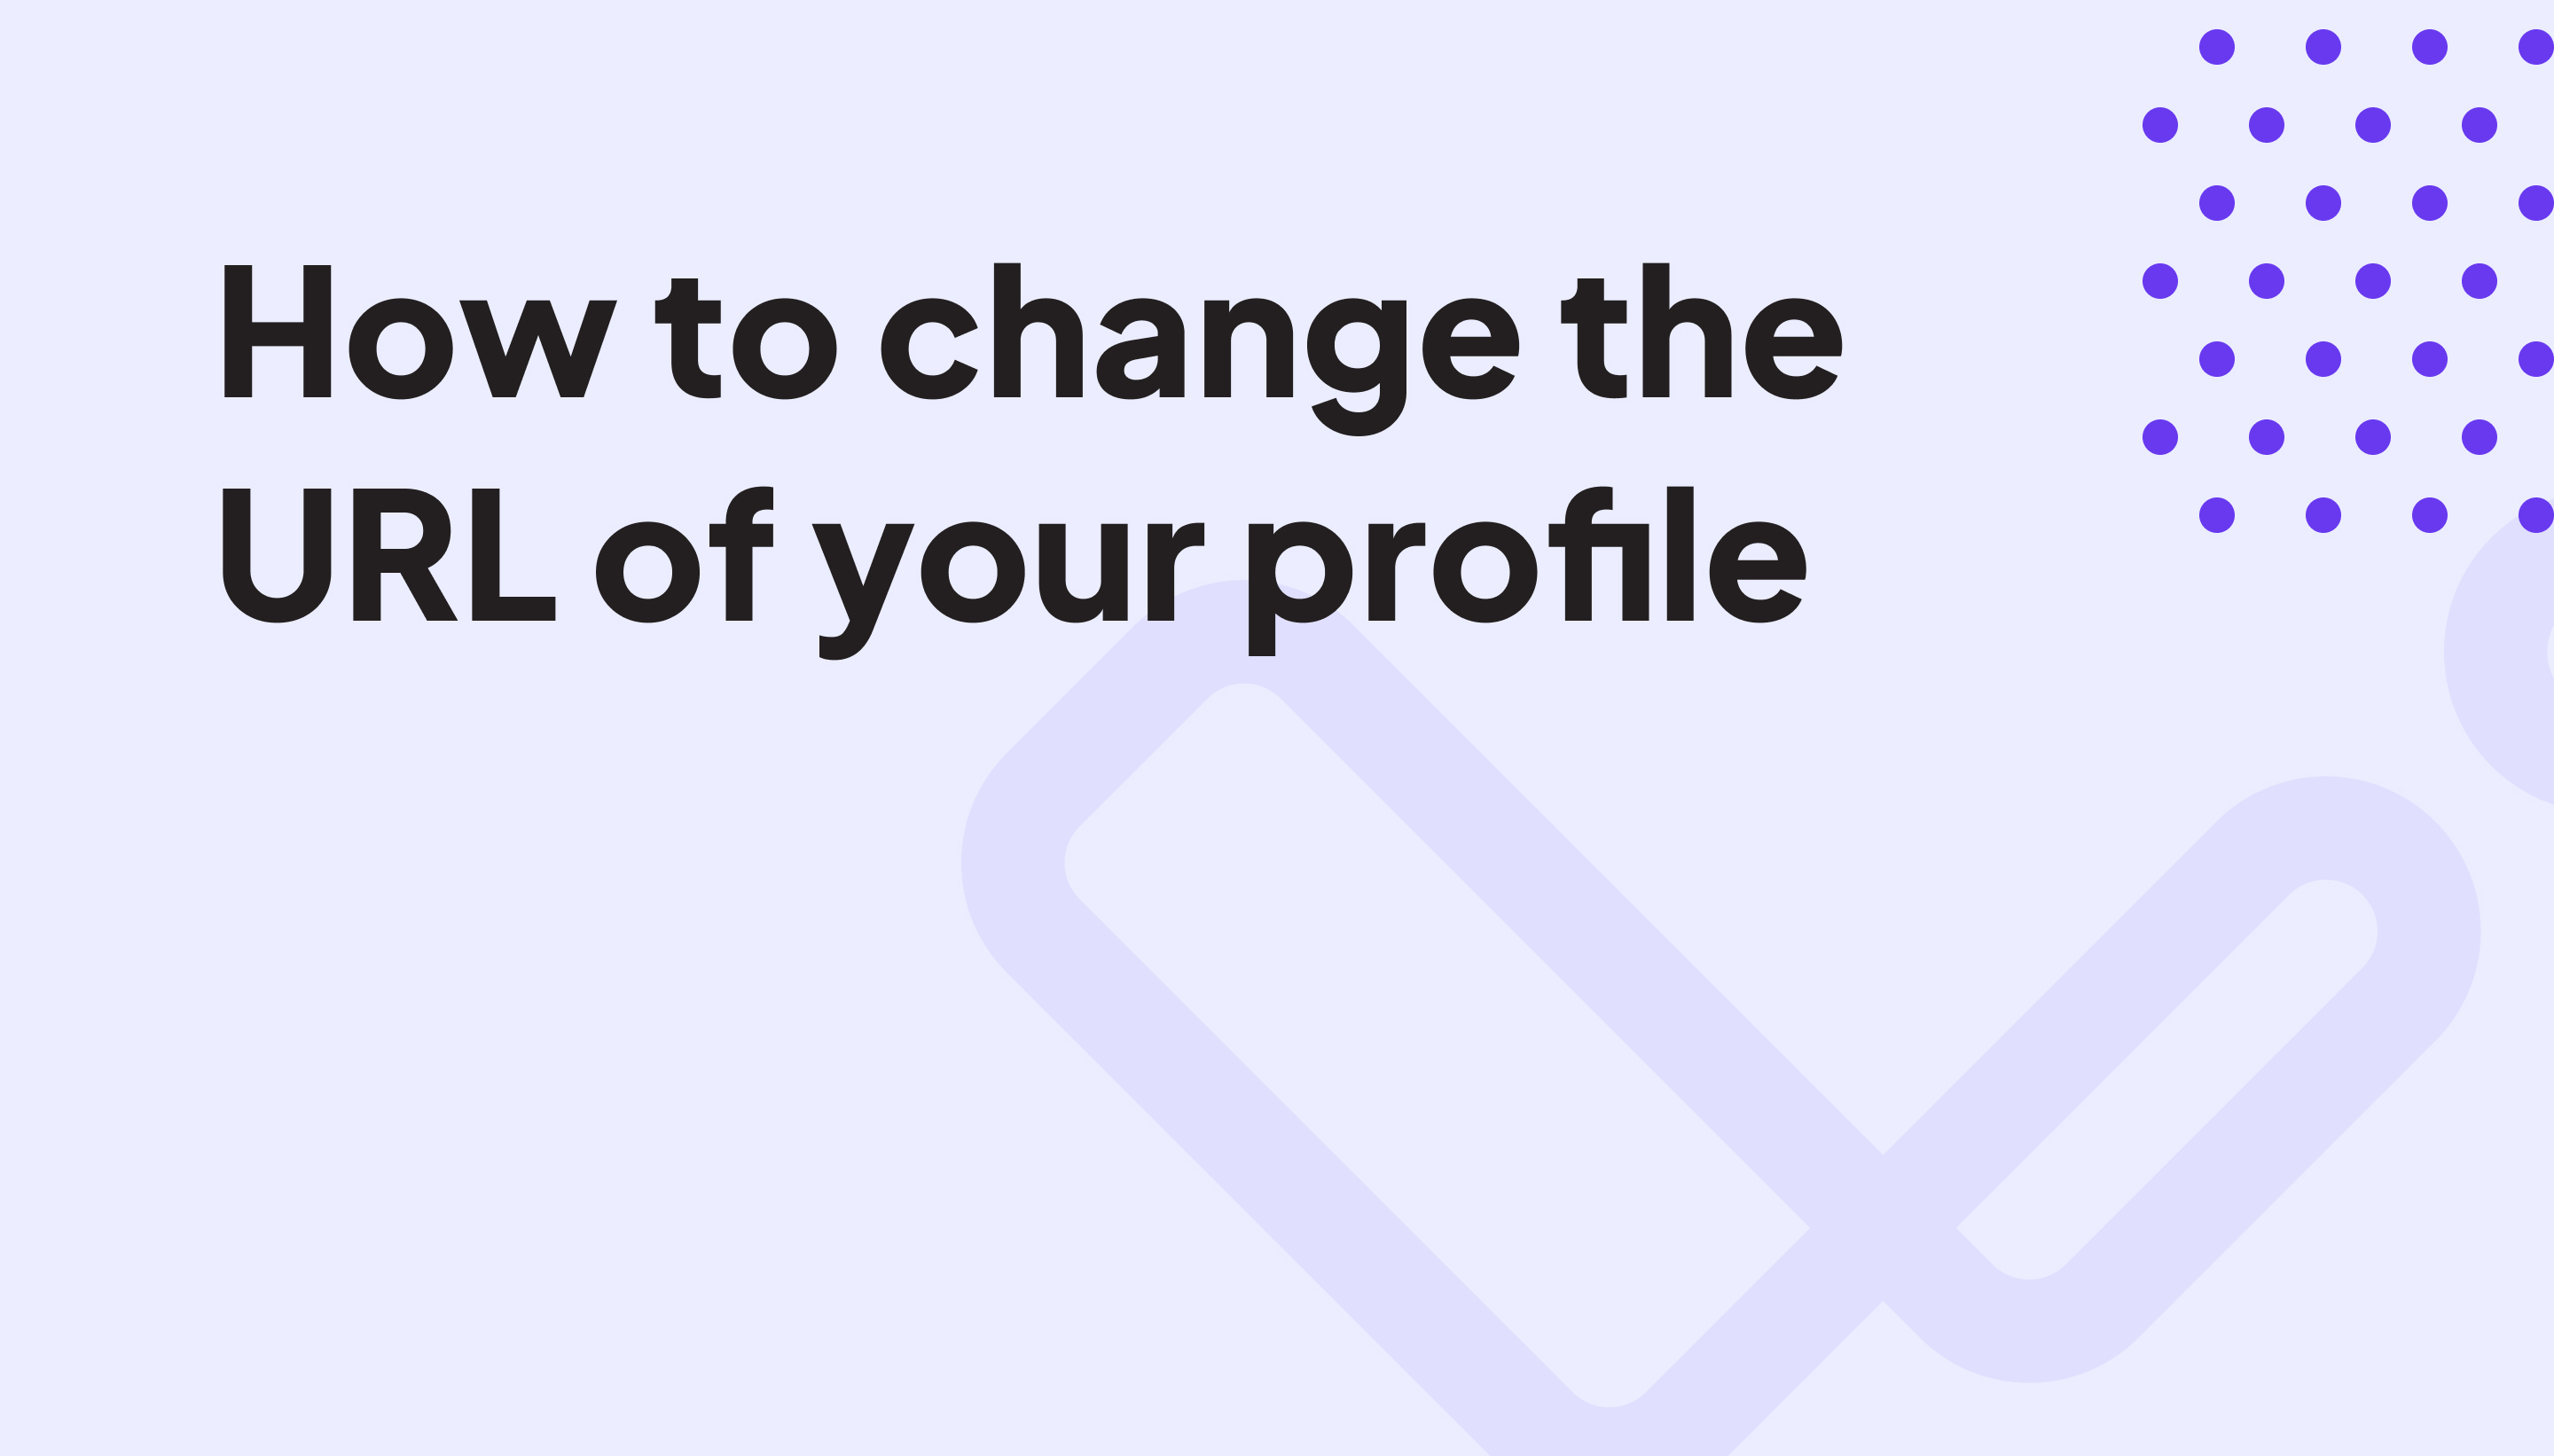 How to change the URL of your profile